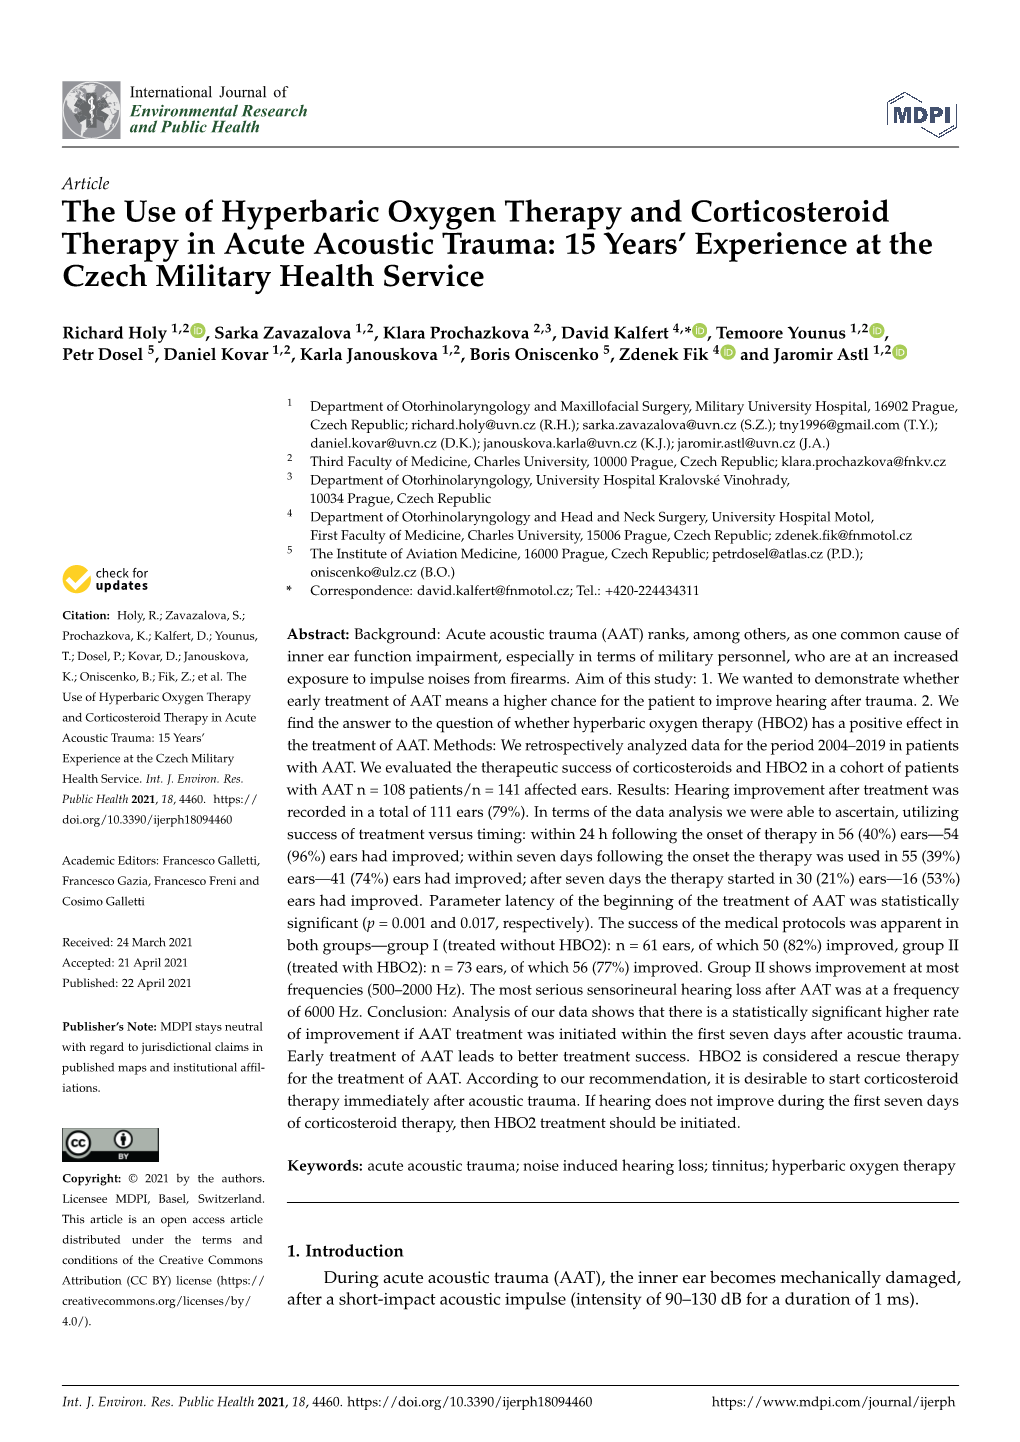 The Use of Hyperbaric Oxygen Therapy and Corticosteroid Therapy in Acute Acoustic Trauma: 15 Years’ Experience at the Czech Military Health Service